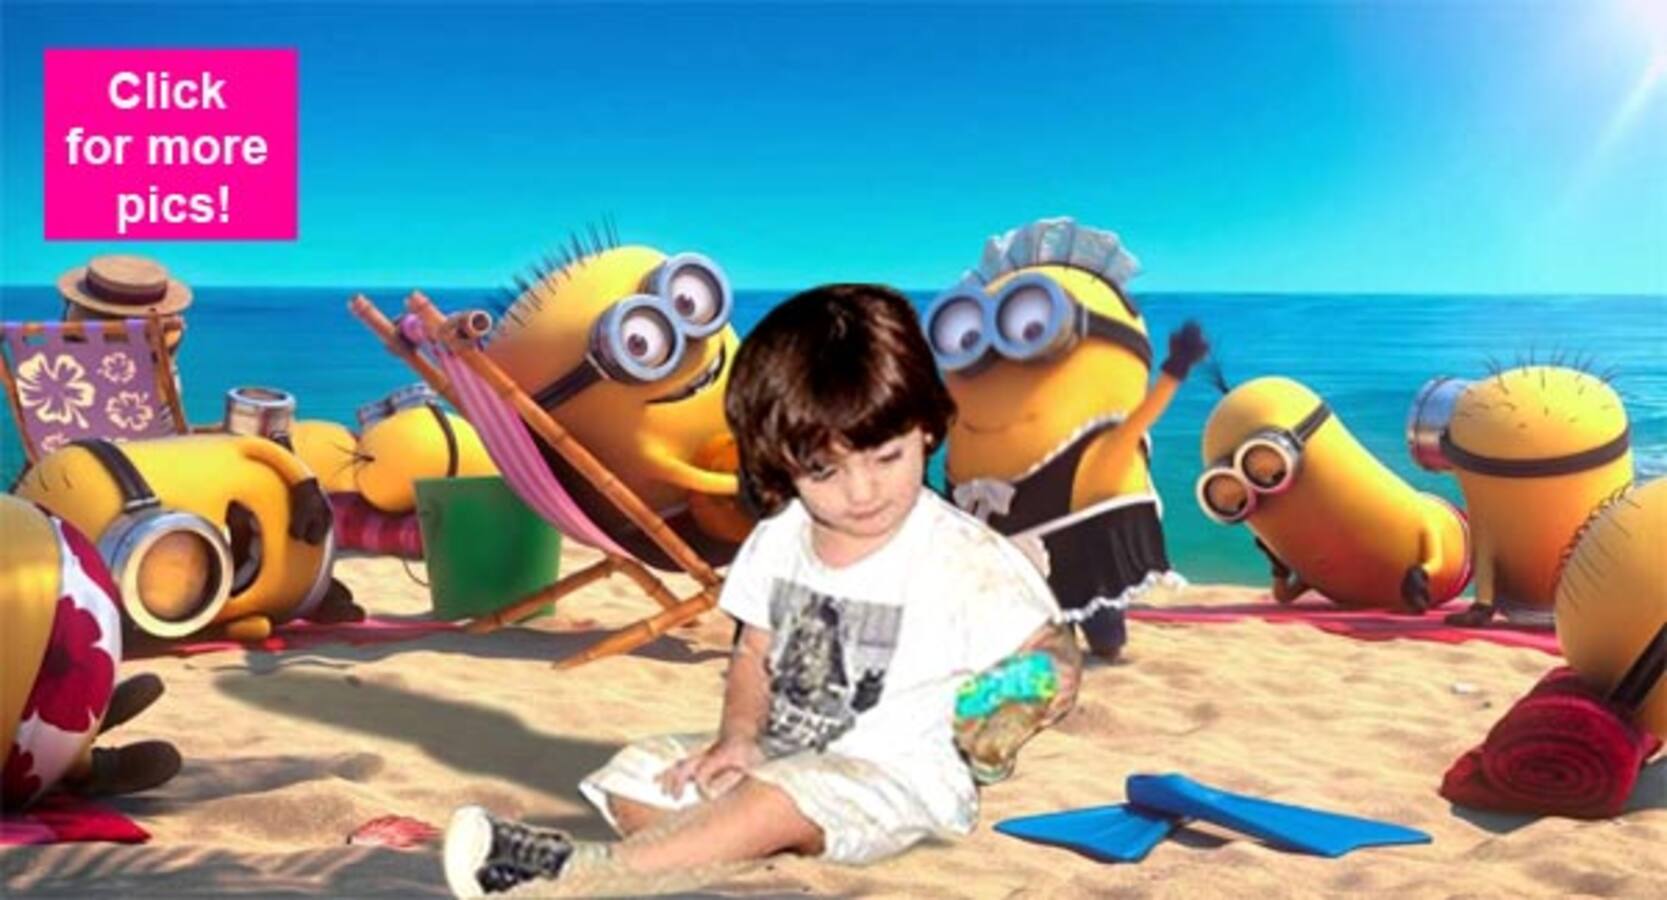 BollywoodLife makes AbRam Khan chill with the Minions and it's super cool -  view pics! - Bollywood News & Gossip, Movie Reviews, Trailers & Videos at  